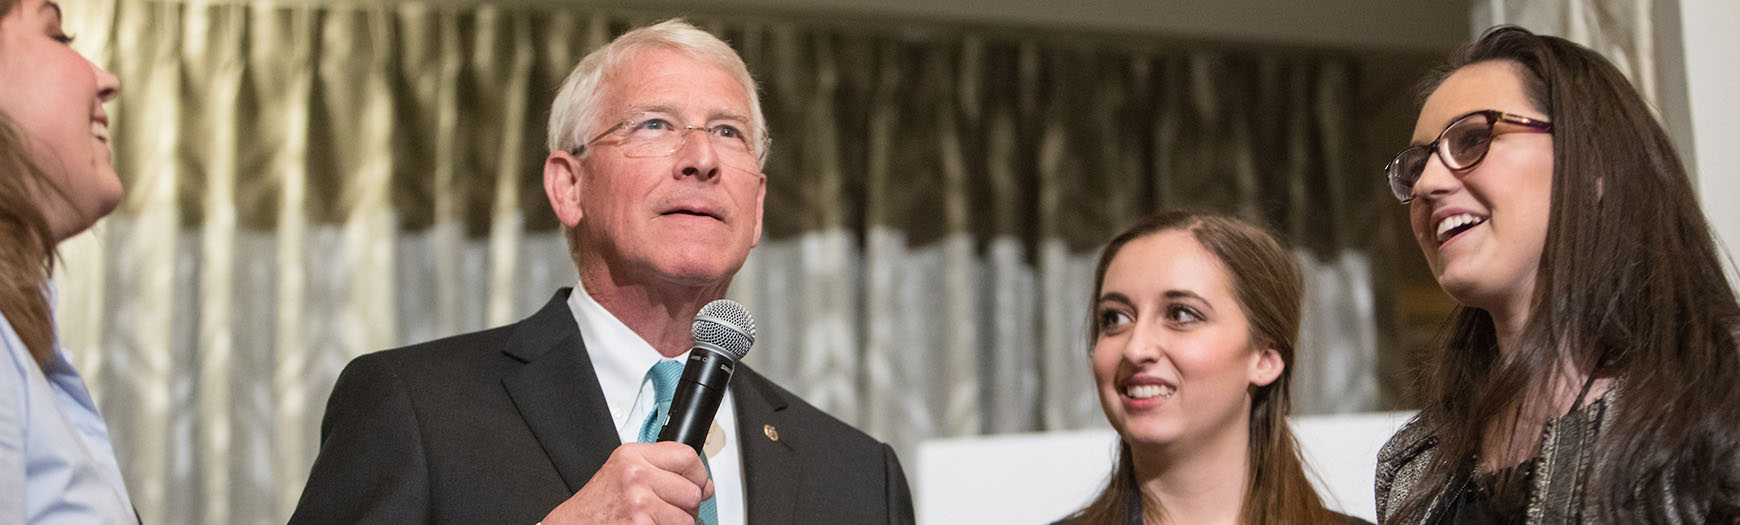 Senator Roger F. Wicker (R-MS) speaks at the podium during his 2017 USSYP Republican Co-Chair keynote, The Mayflower Hotel, Washington, DC